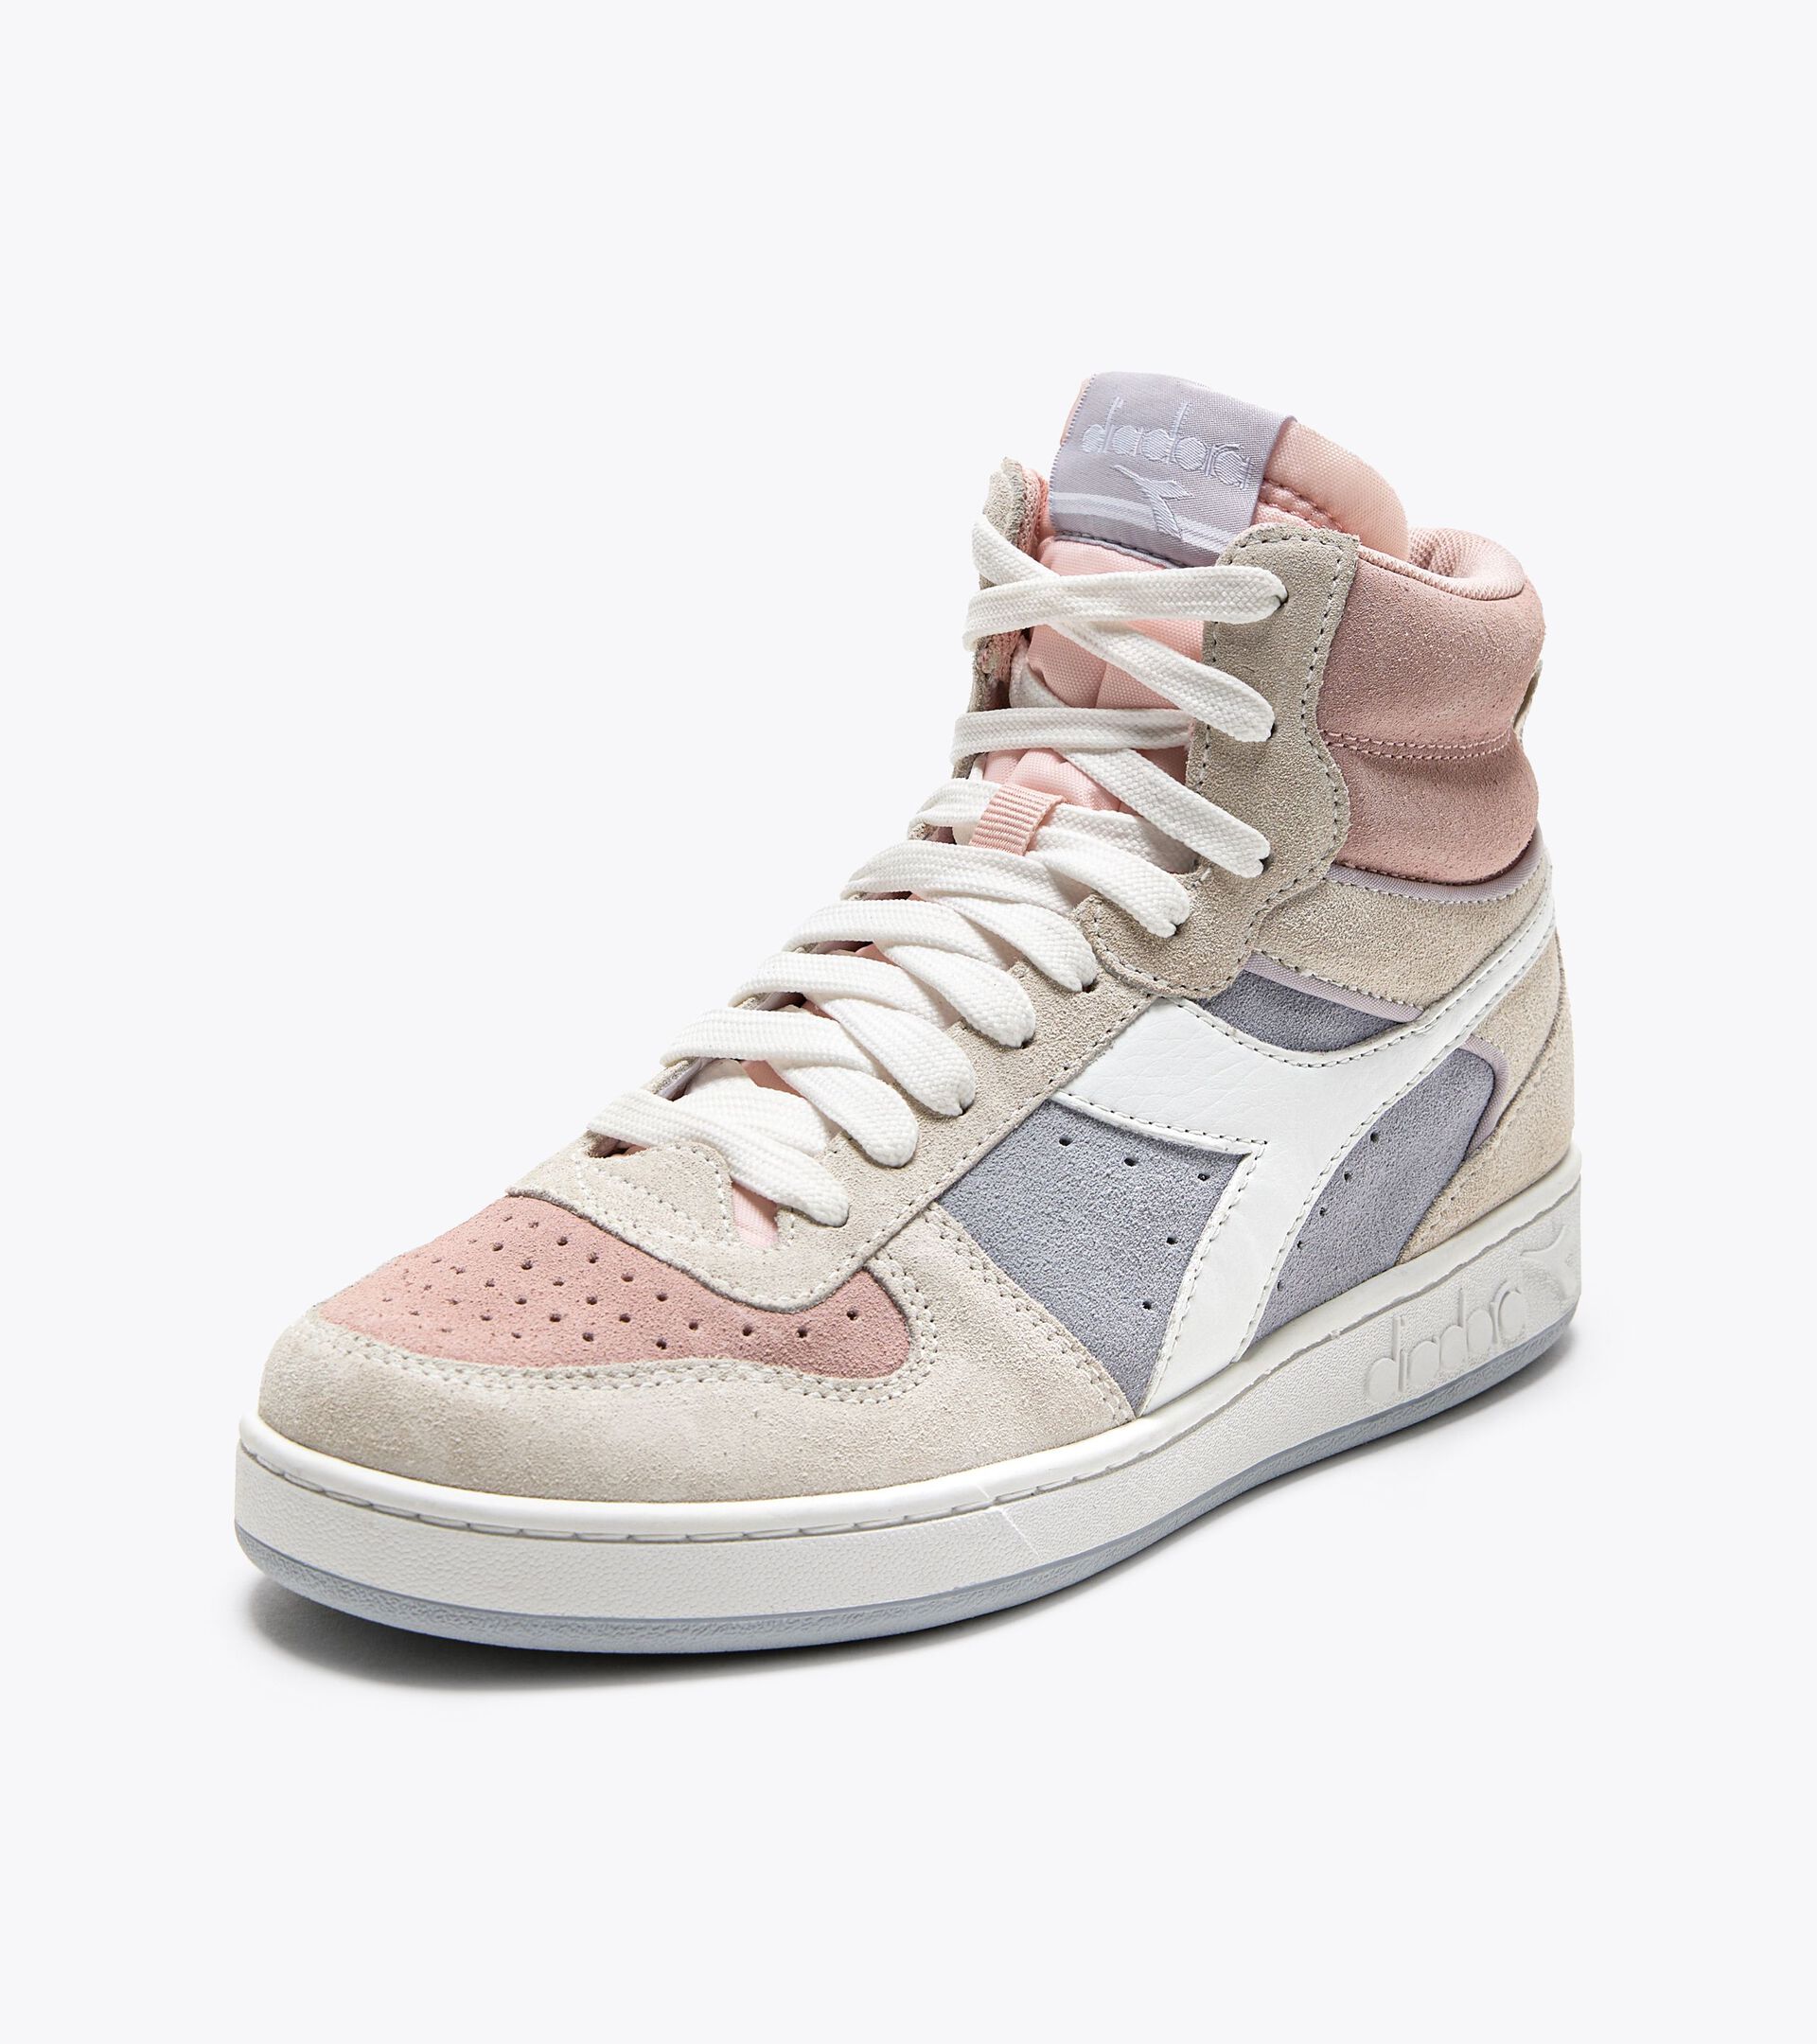 Sporty sneakers - Women MAGIC BASKET MID SUEDE WN ARCTIC ICE/BARELY BLUE - Diadora